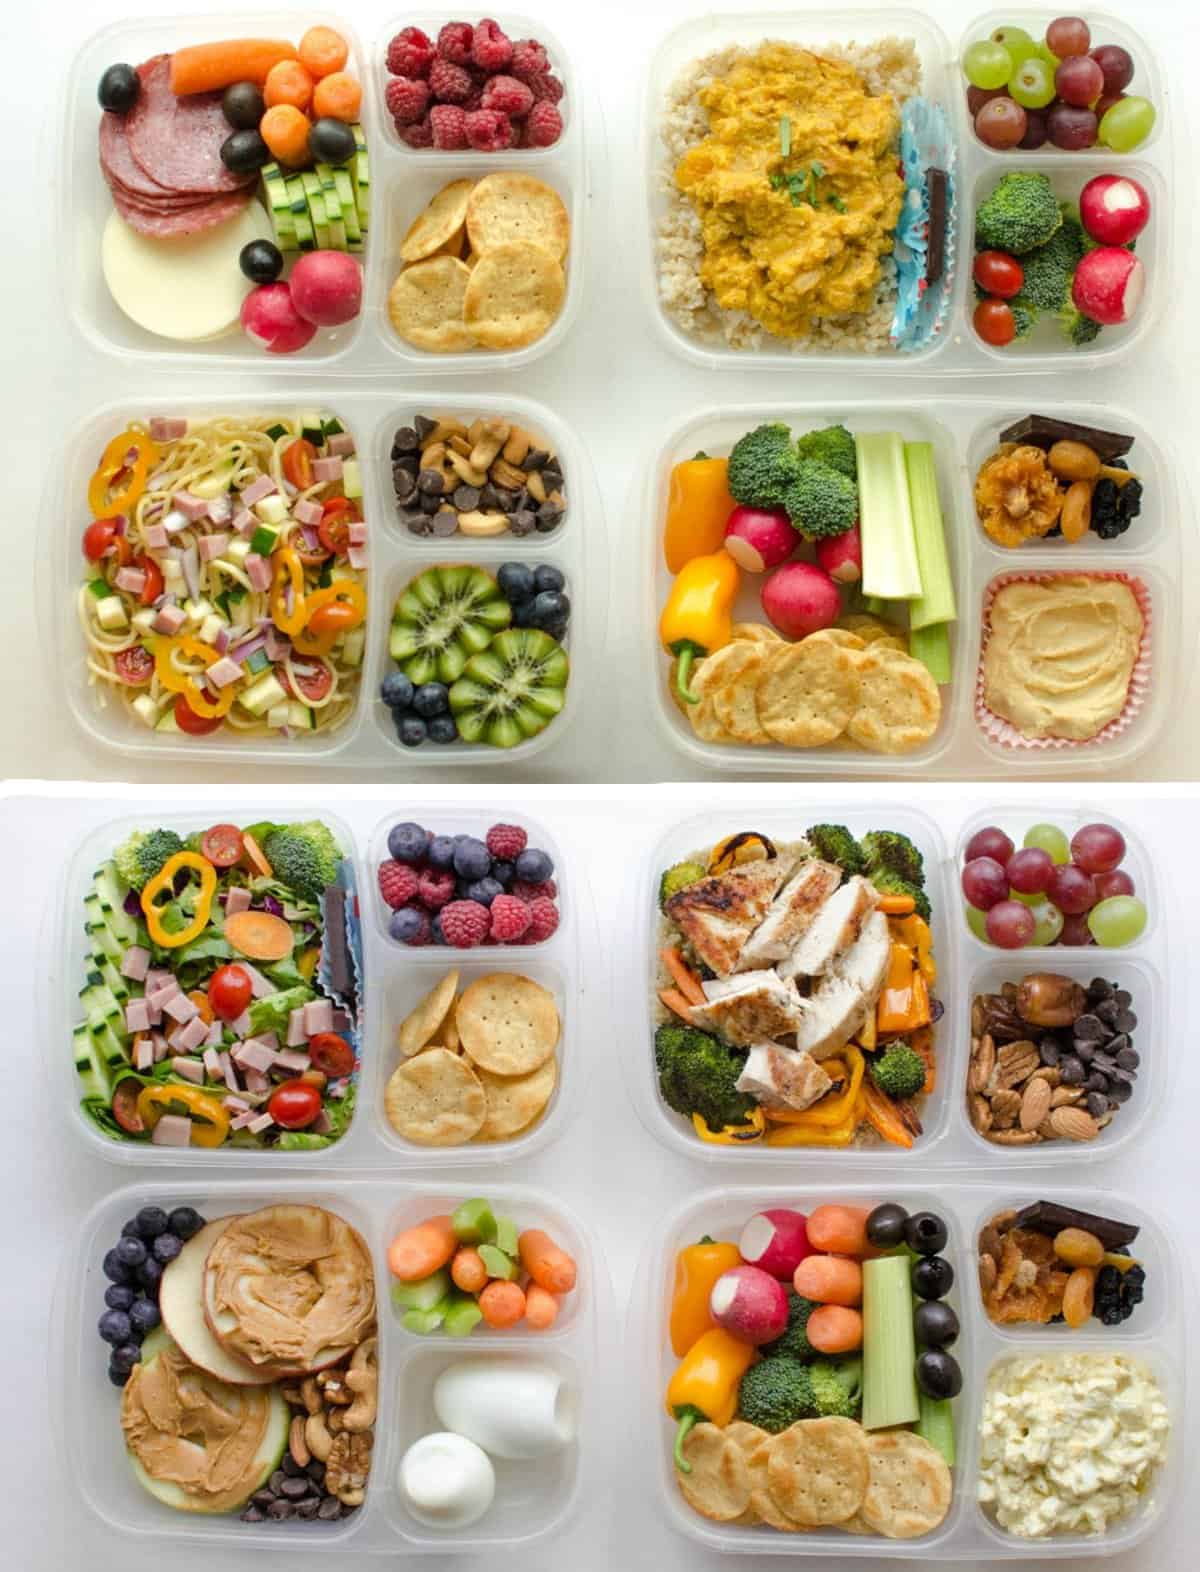 8 Adult Lunch Box Ideas | Healthy Meal Prep Recipes for Work Lunches